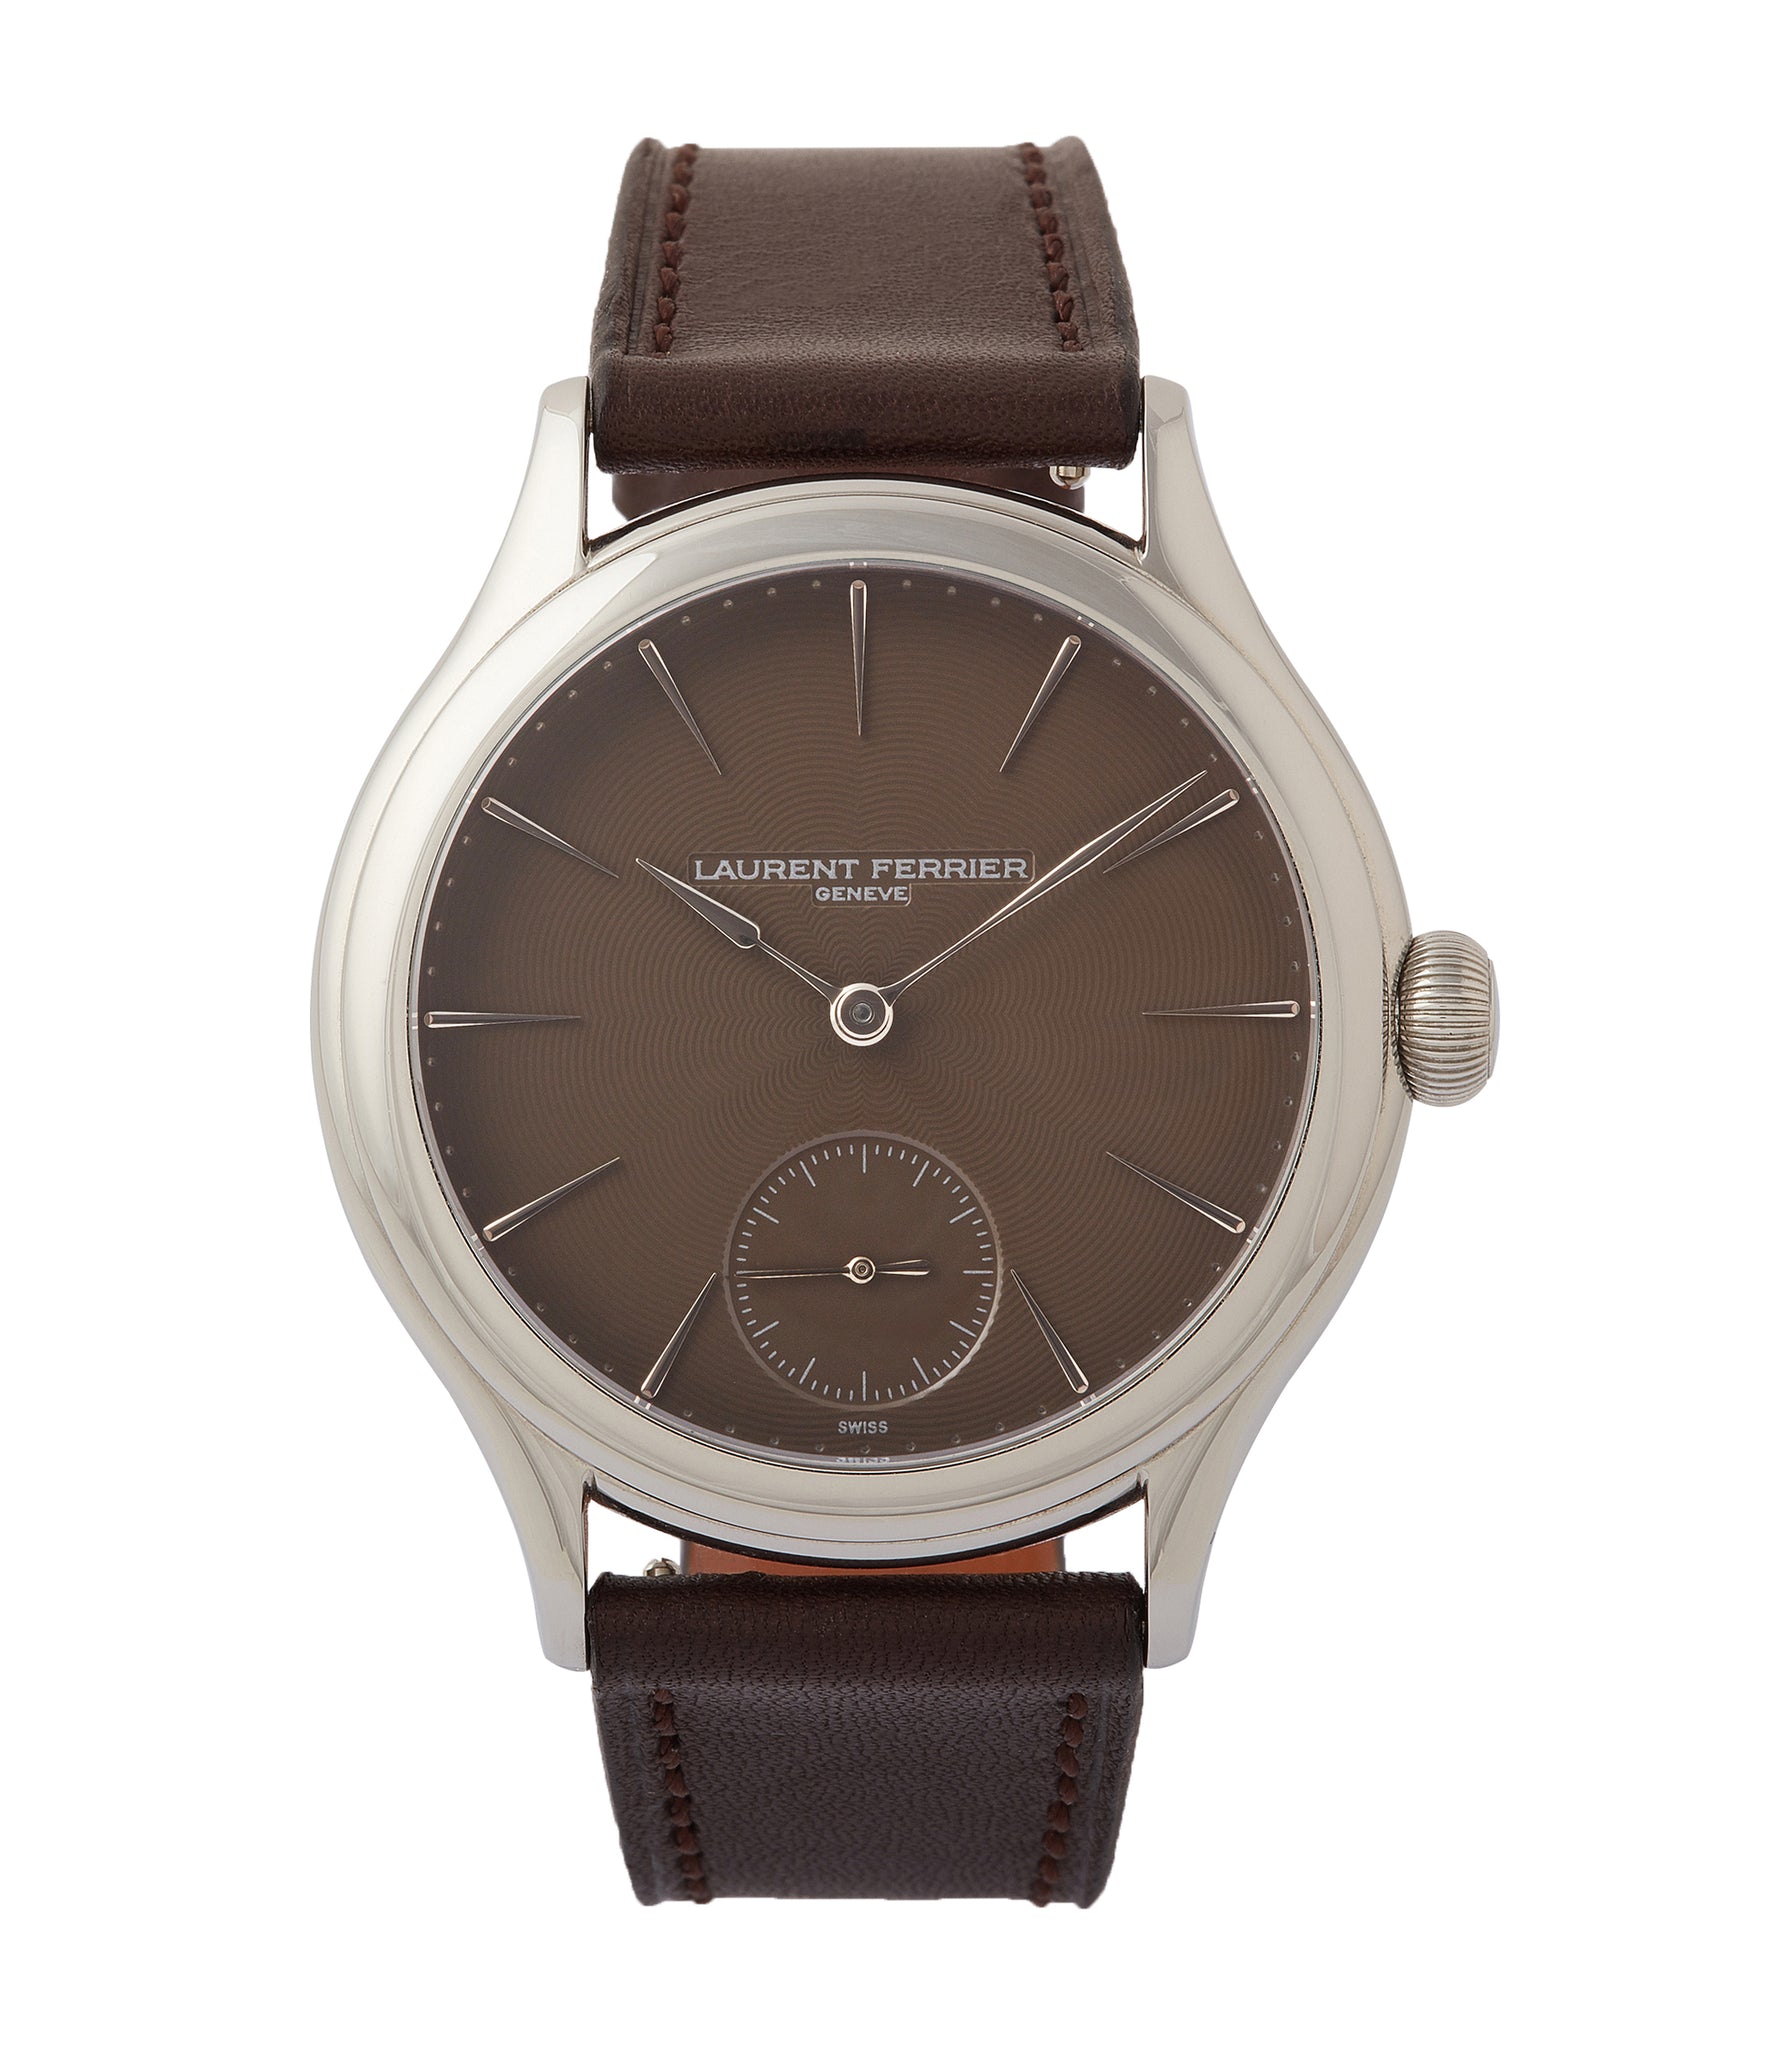 buy Prototype Laurent Ferrier Galet Micro-rotor LF 229.01 "Only Watch 2011" steel watch brown dial for sale online at A Collected Man London UK approved seller of independent watchmakers